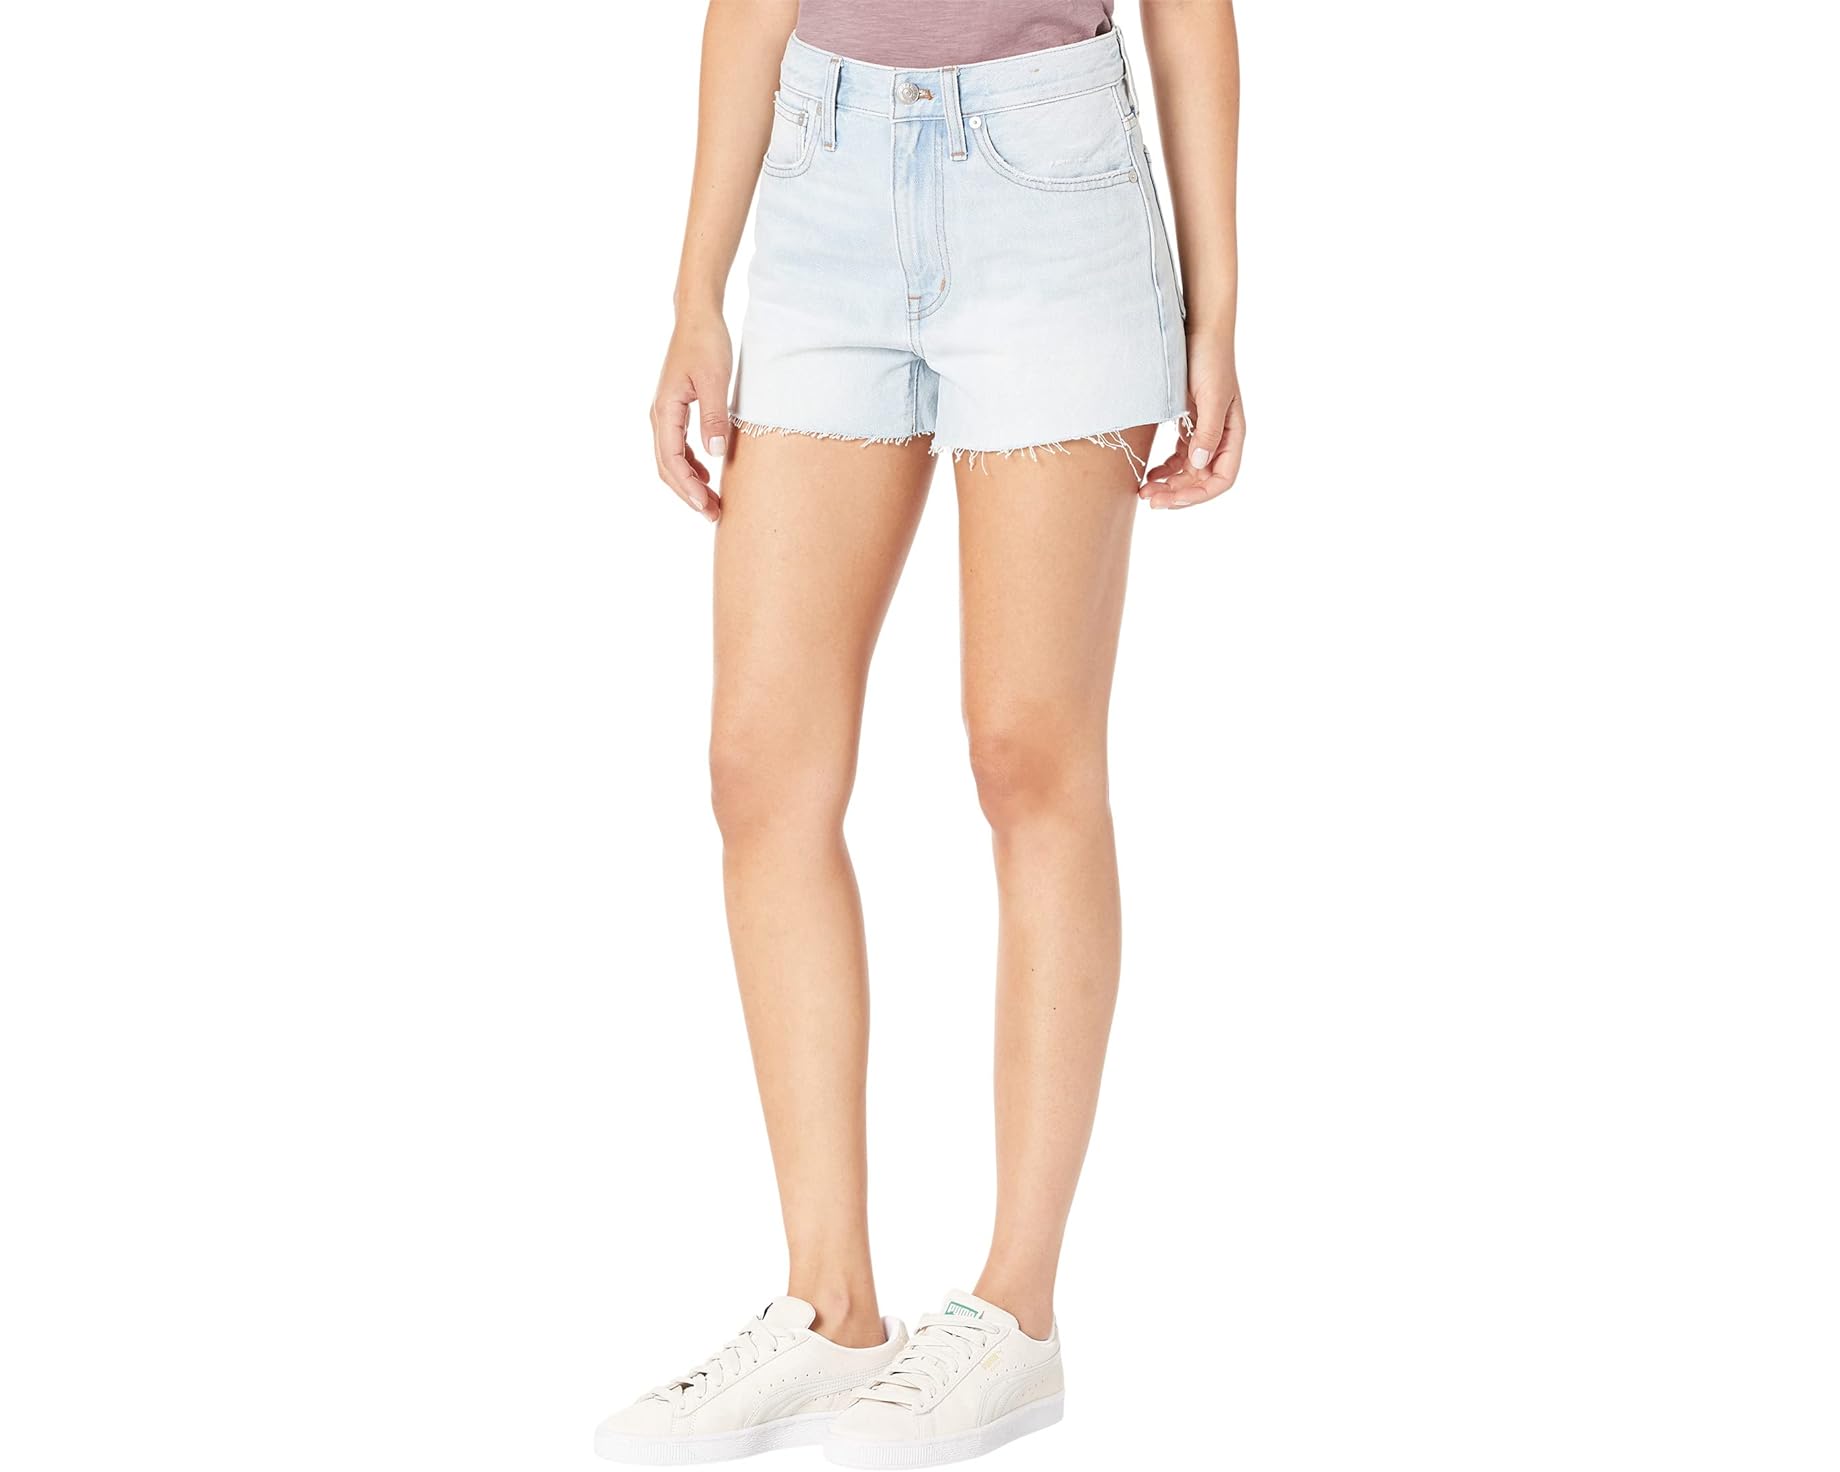 Madewell Relaxed Denim Shorts in Essen Wash